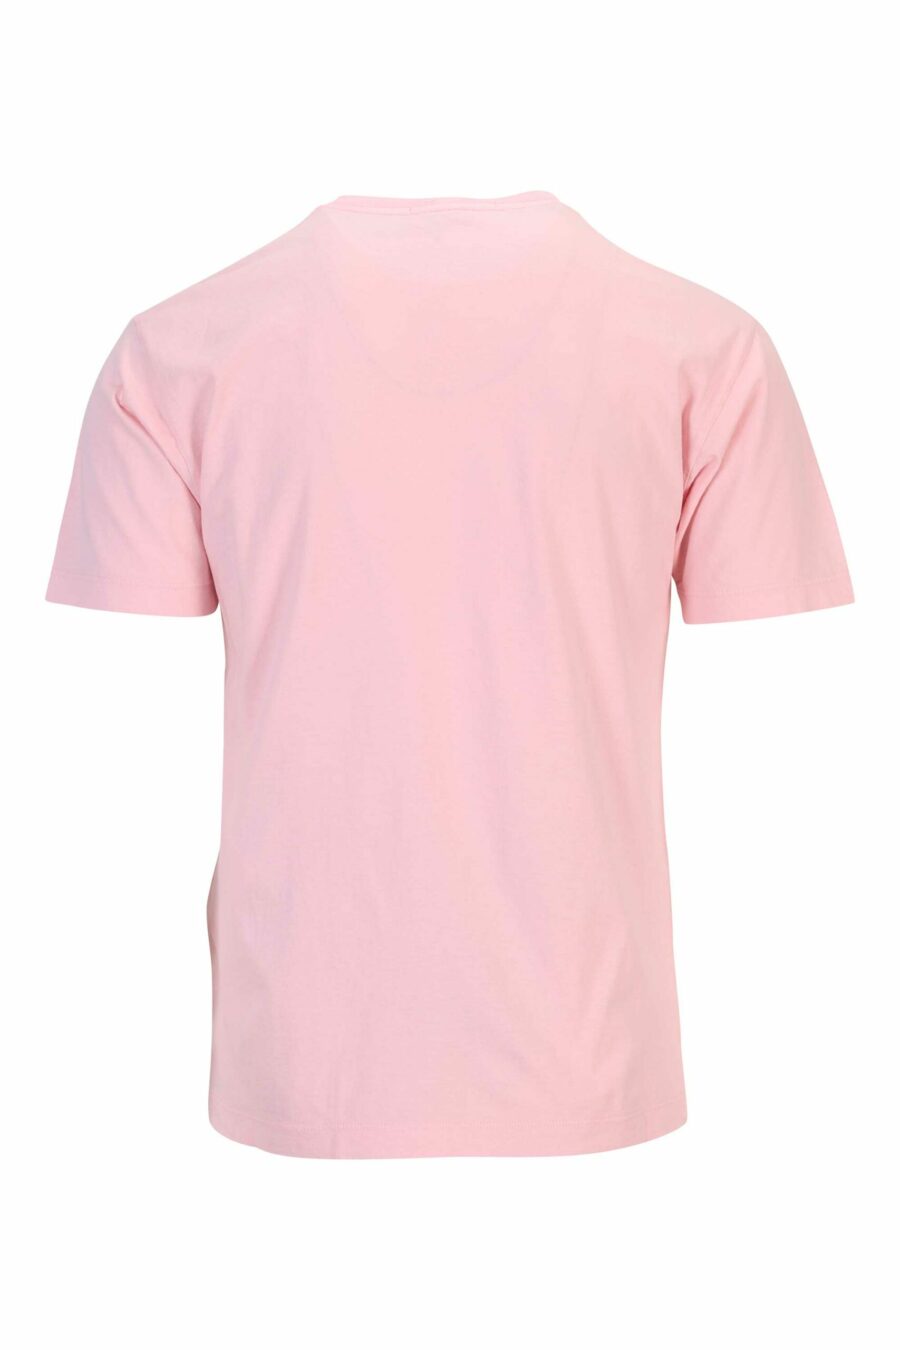 Pink T-shirt with compass logo print - 8052572903991 1 scaled